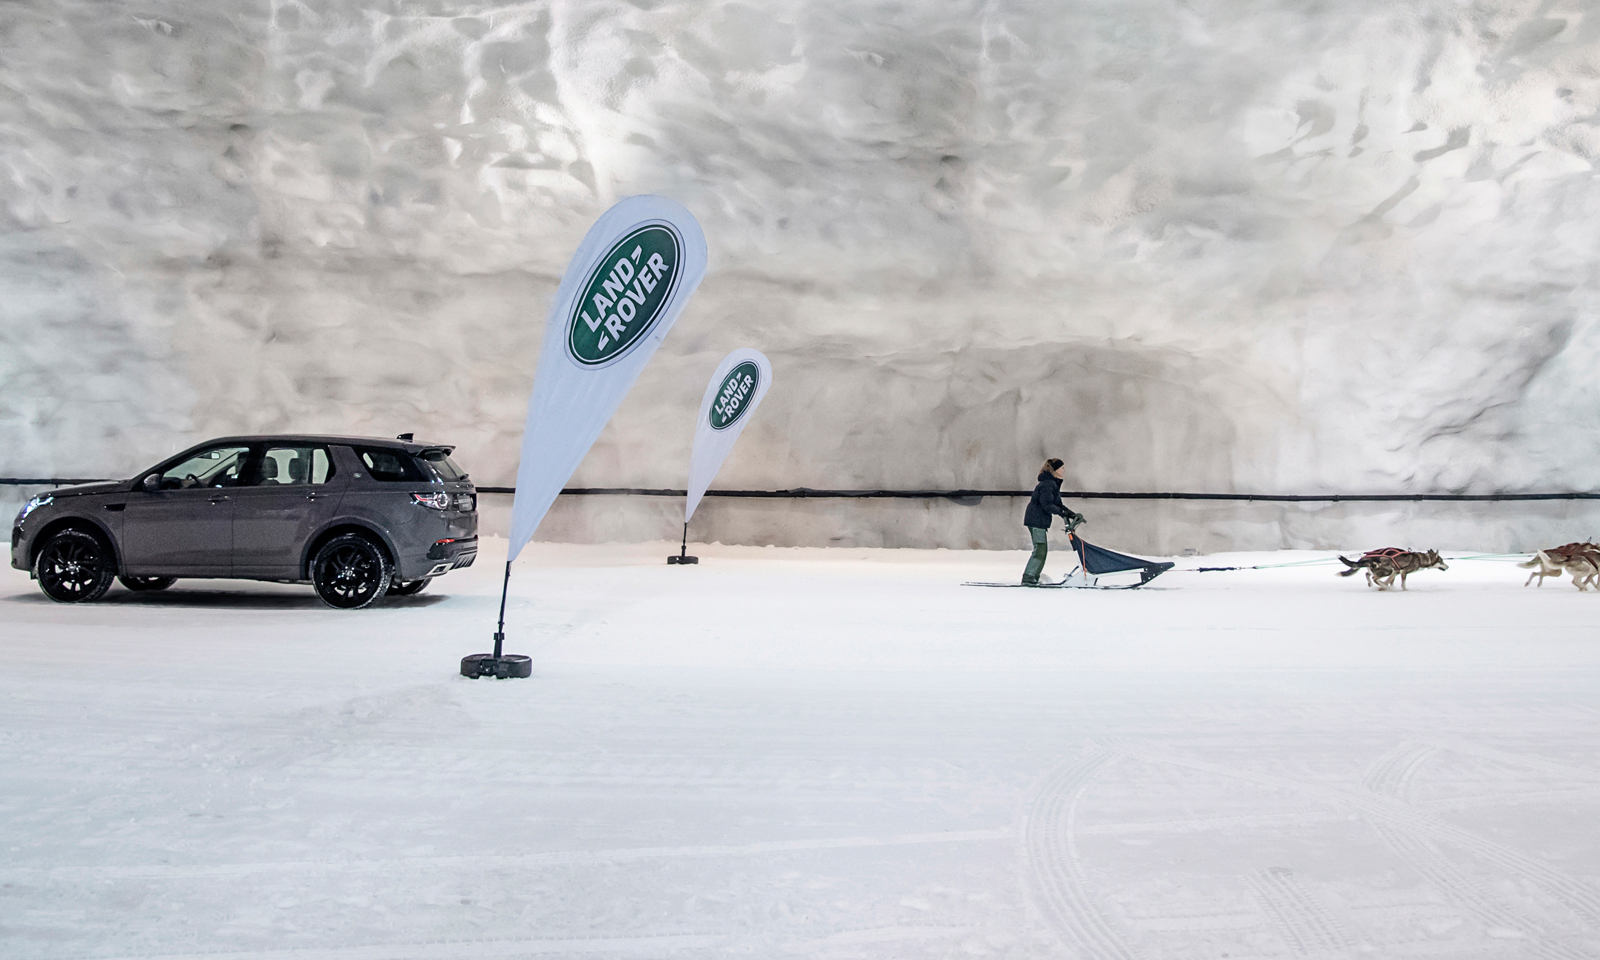 Discovery Sport takes on dog sled team in unique race at Vesileppis Ski Tunnel in Finland